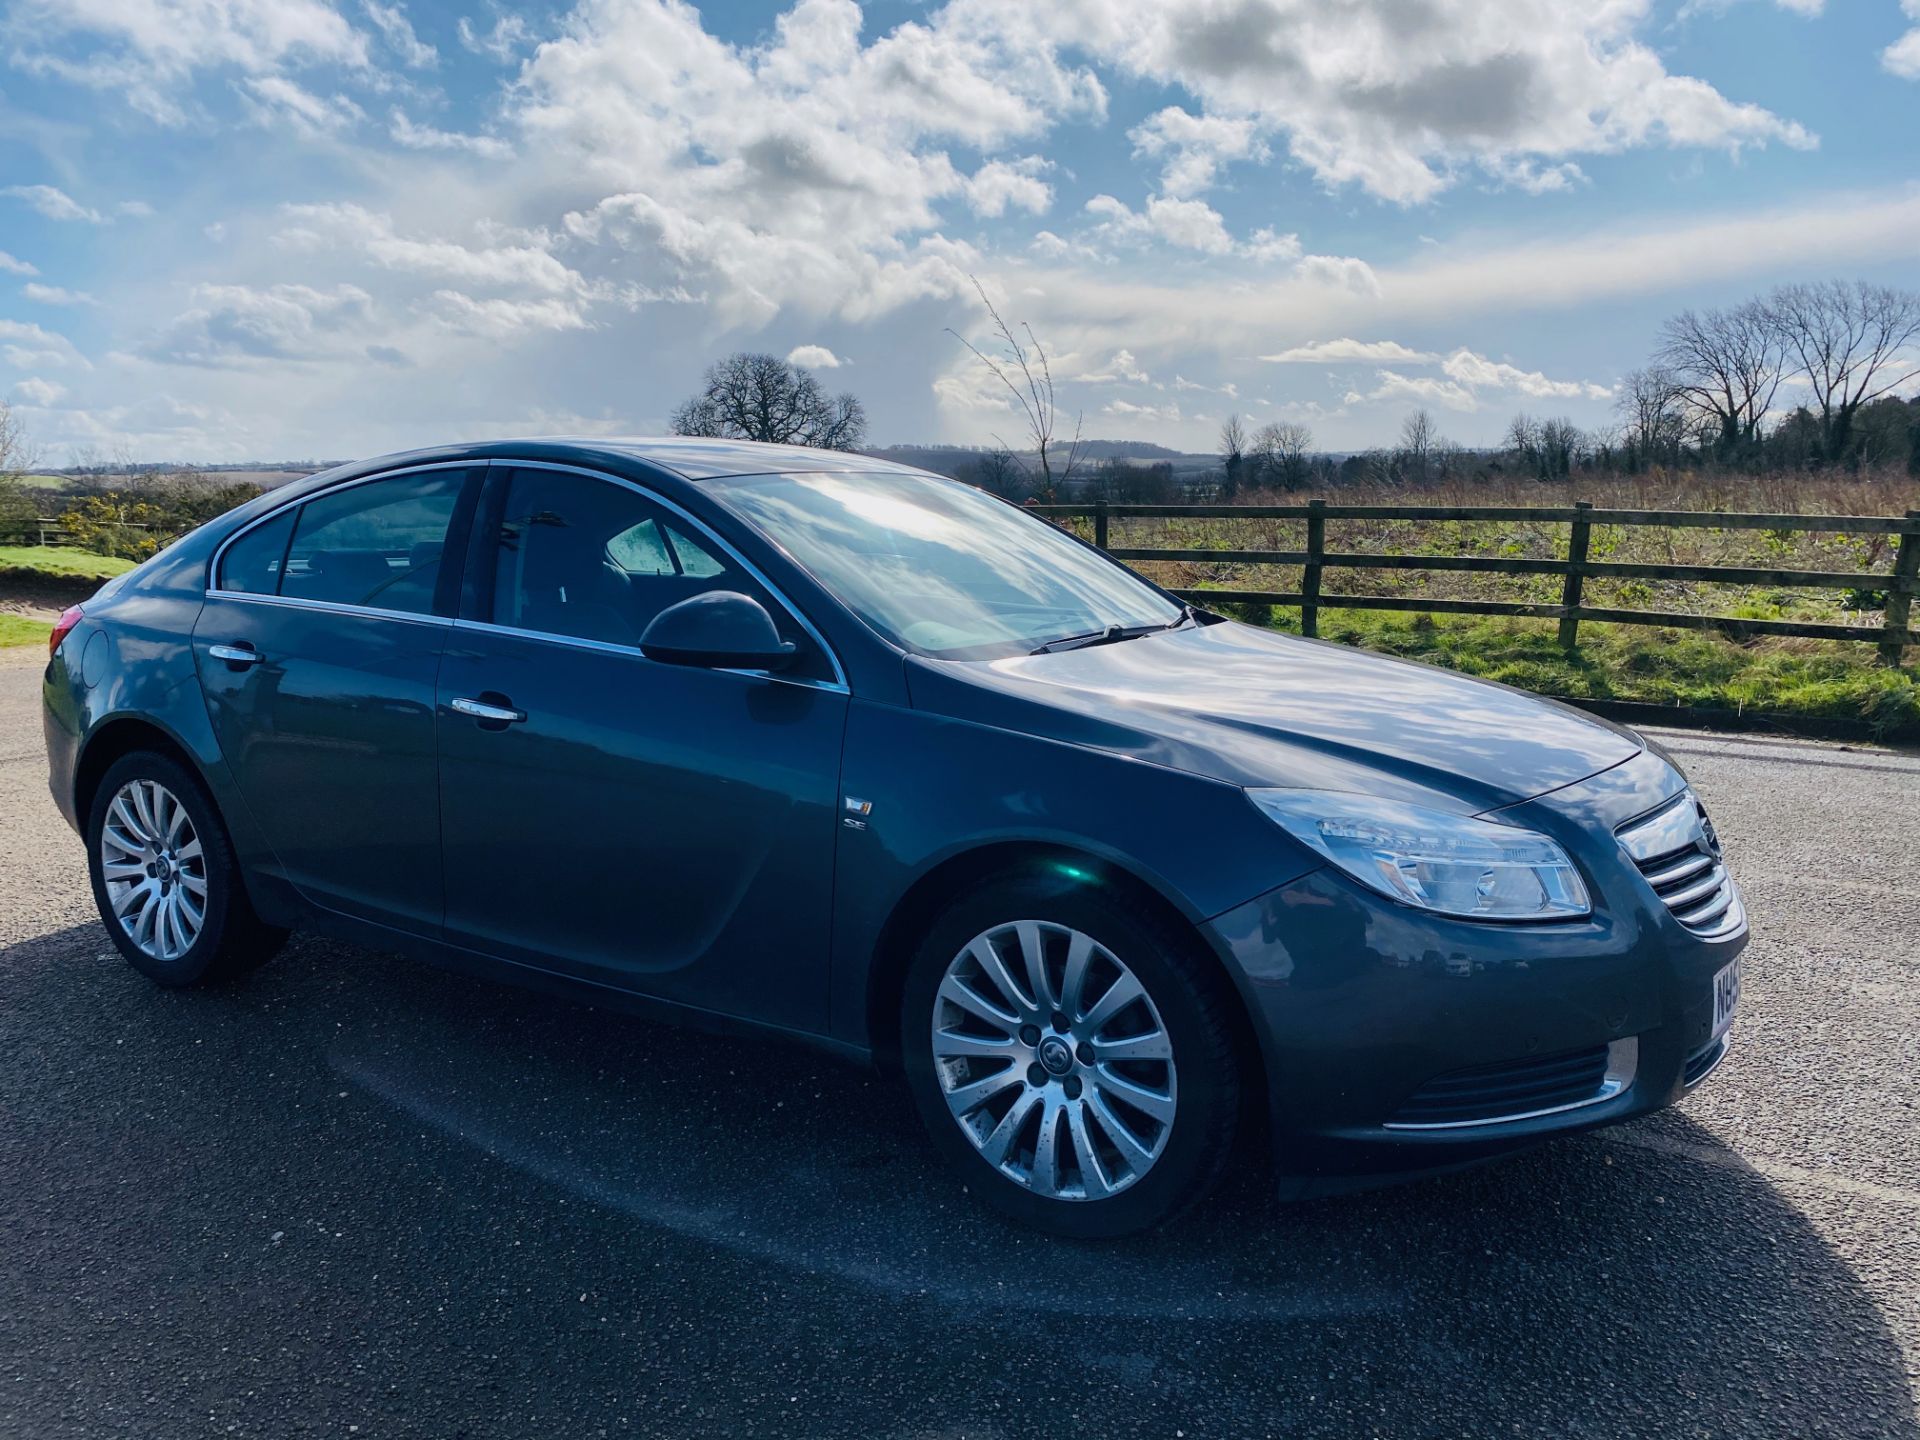 (ON SALE) VAUXHALL INSIGNIA 2.0CDTI "SE" 5 DOOR HATCHBACK - LEATHER - AIR CON - LOW MILES - NO VAT - Image 2 of 30